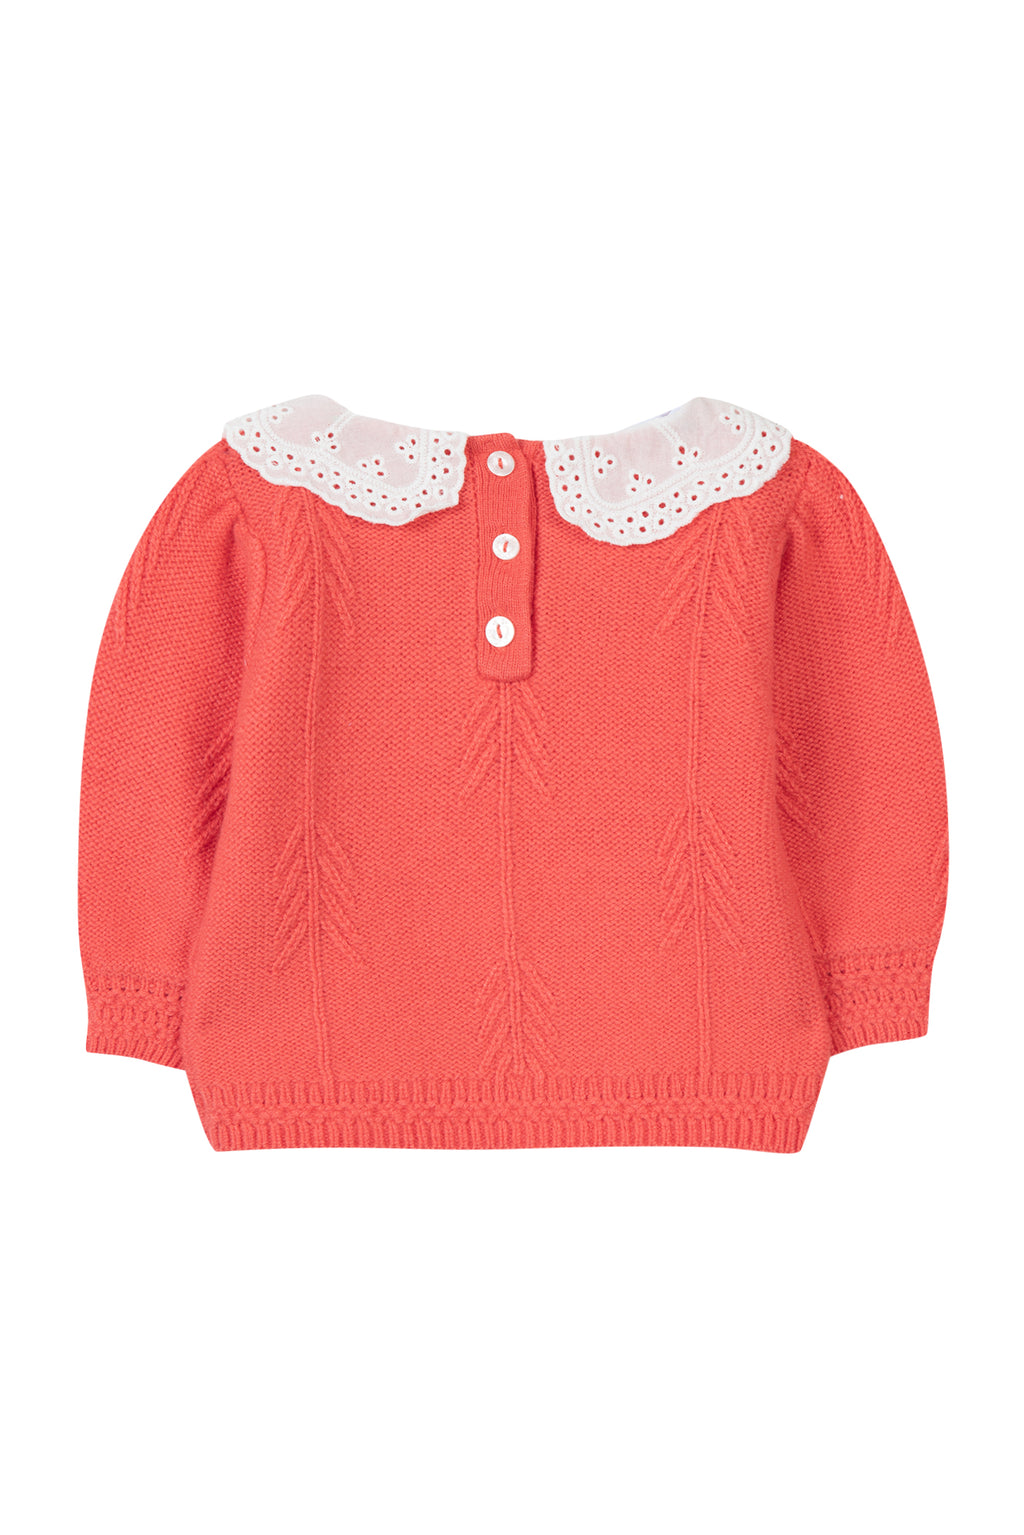 Sweater - Coral Collar Embrodery English